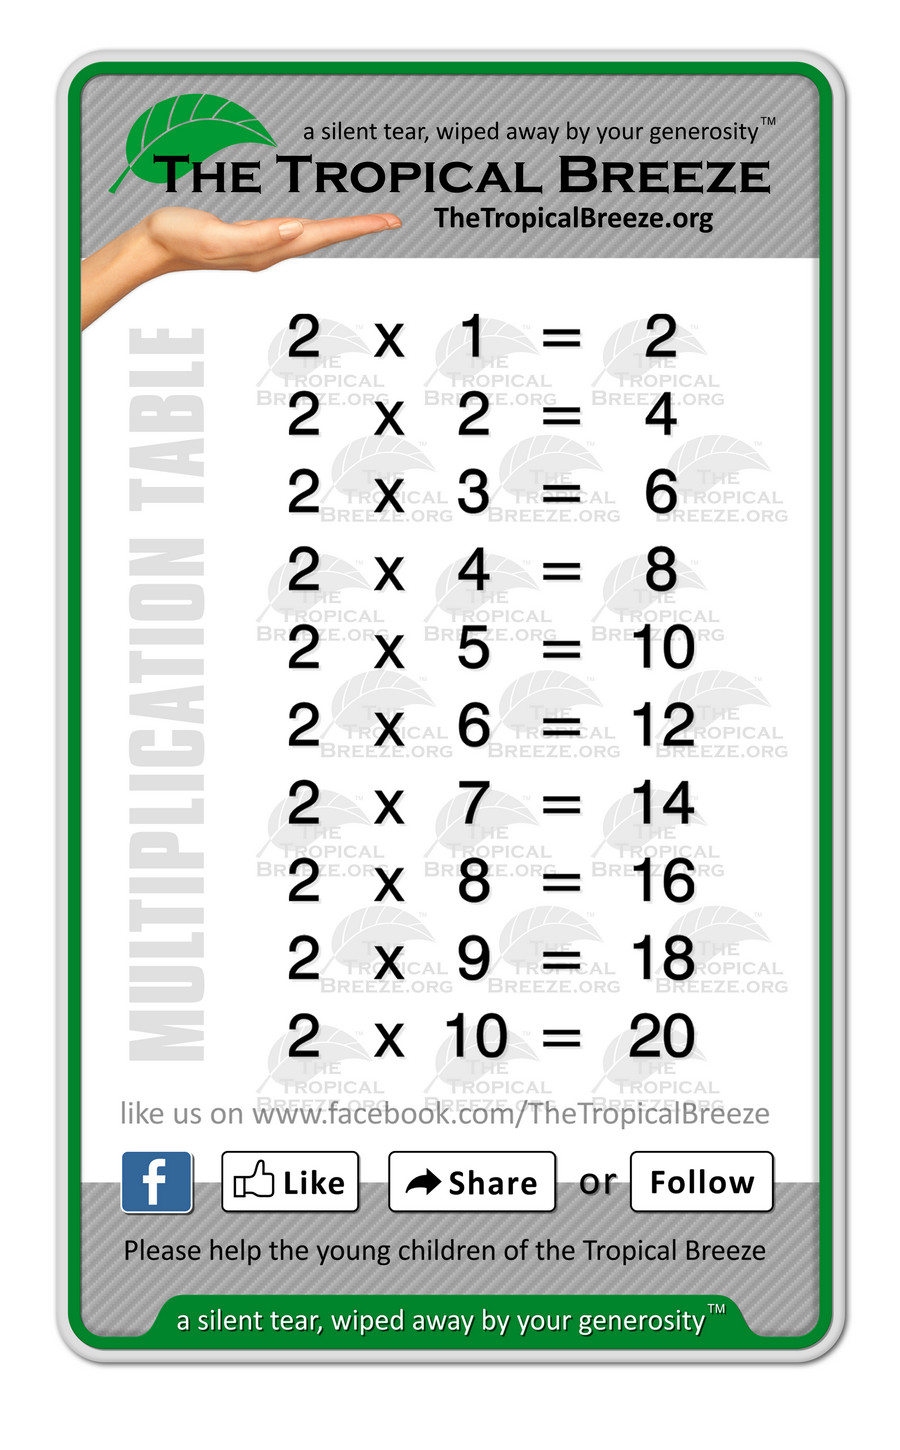 vDownload_free_math_multiplication_tables_from_www.TheTropicalBreeze.org - 2x